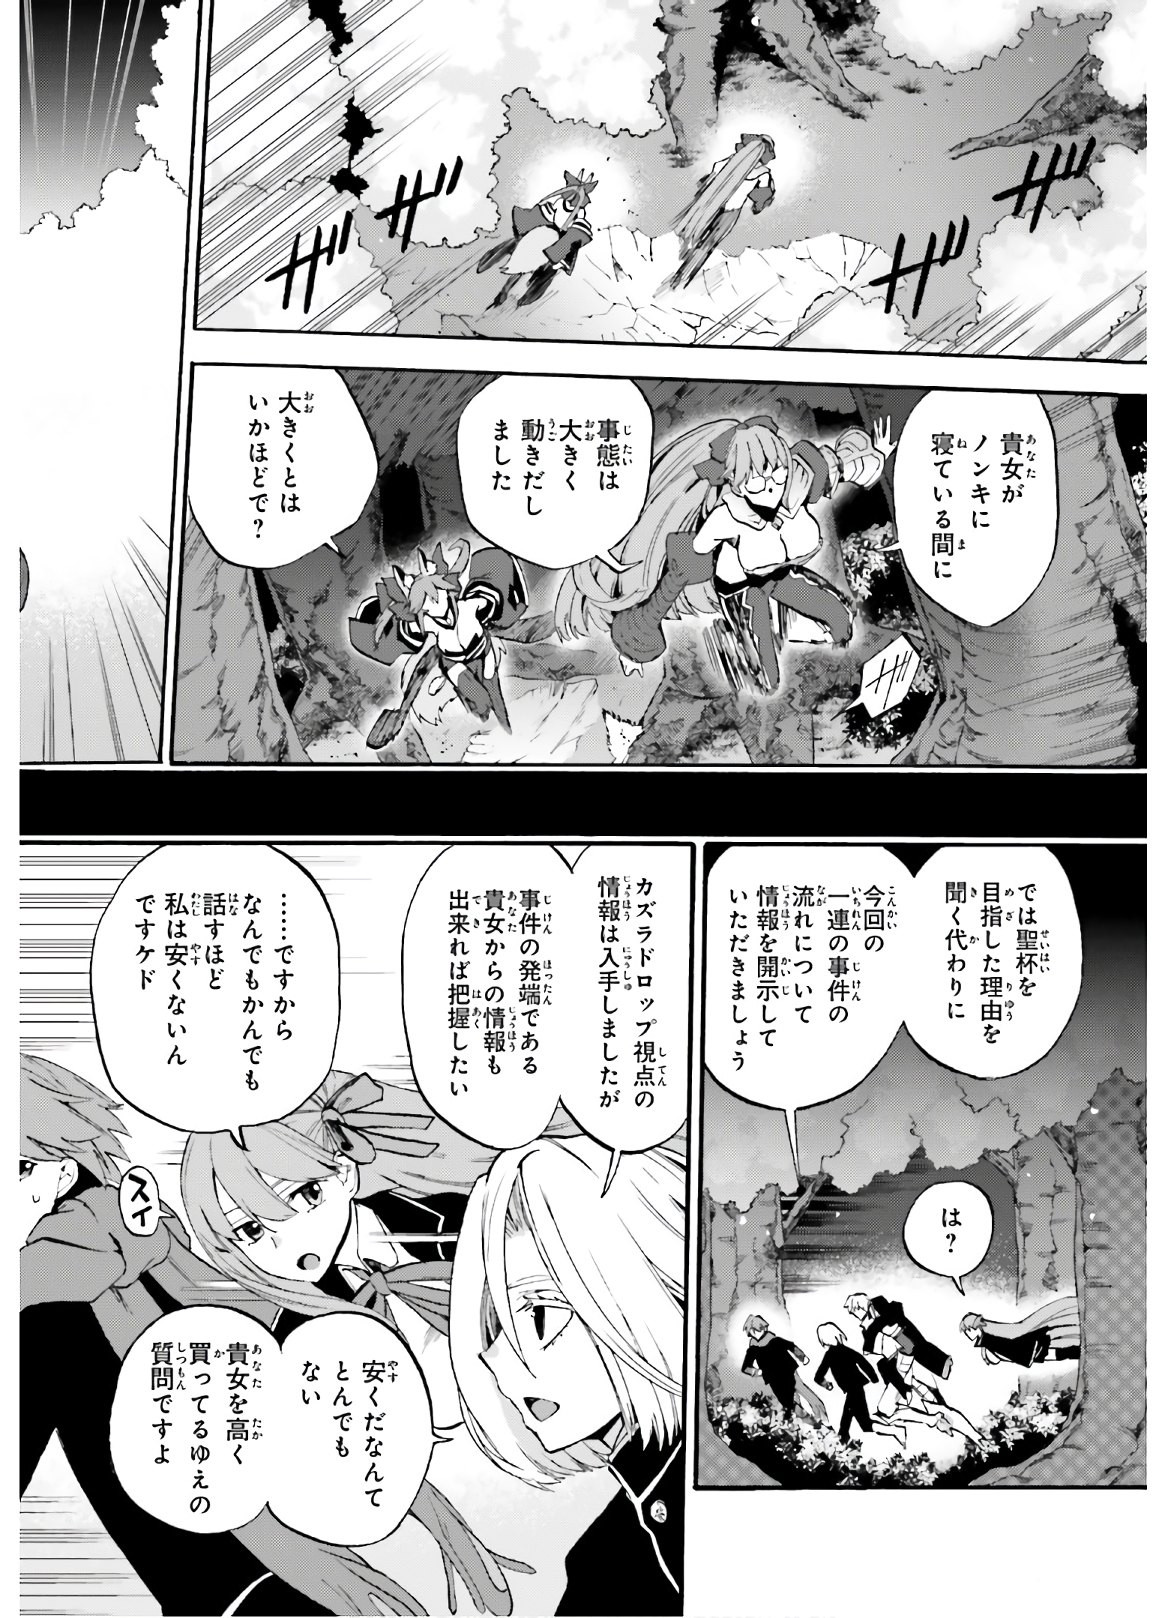 Fate Extra Ccc Fox Tail Chapter 64 Page 6 Raw Manga 生漫画